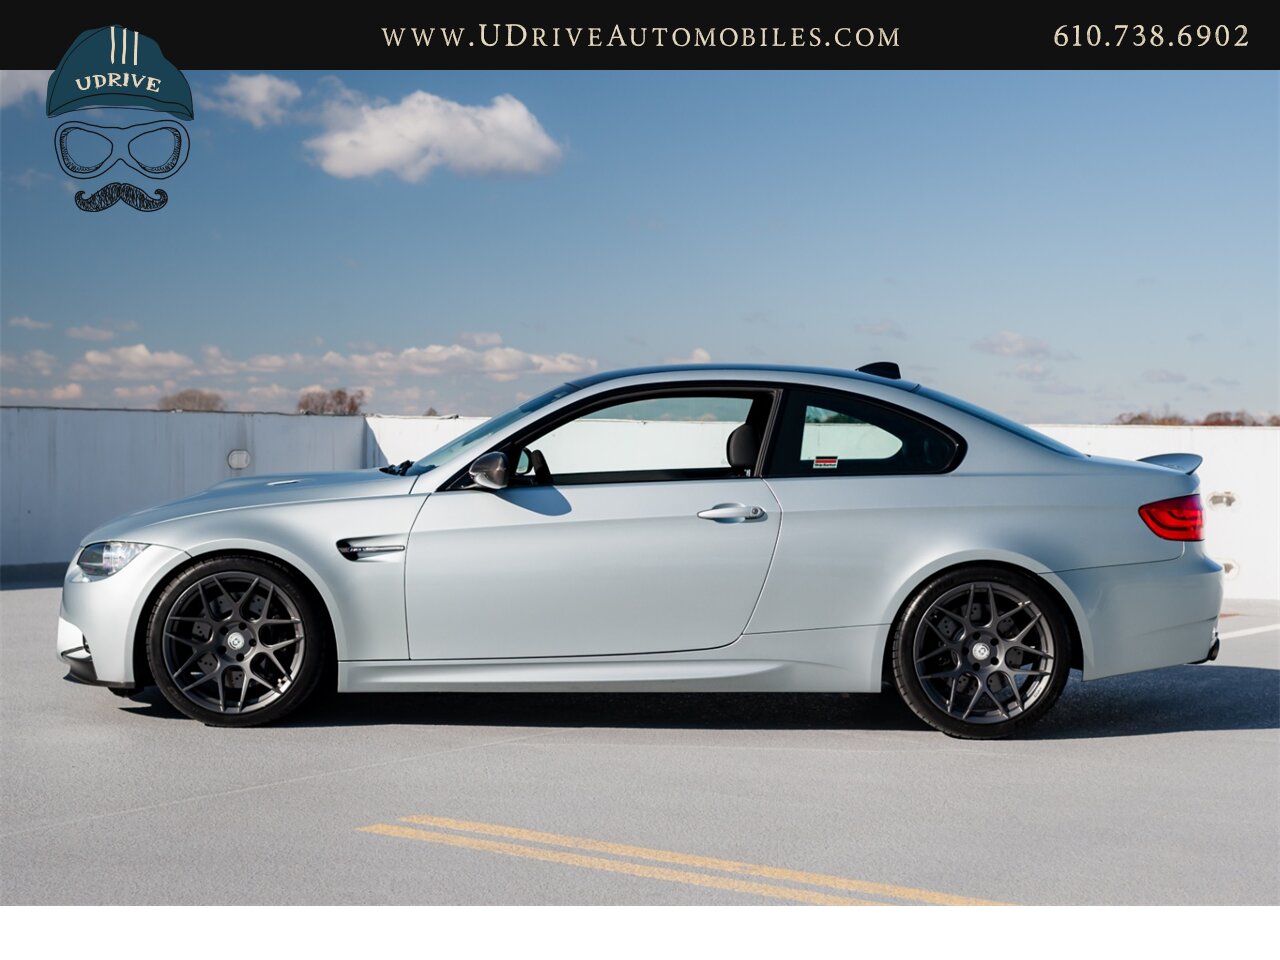 2008 BMW M3 Dinan S3-R M3 1 of 36 Produced DCT  1 Owner Full Service History 4.6L Stroker V8 - Photo 7 - West Chester, PA 19382